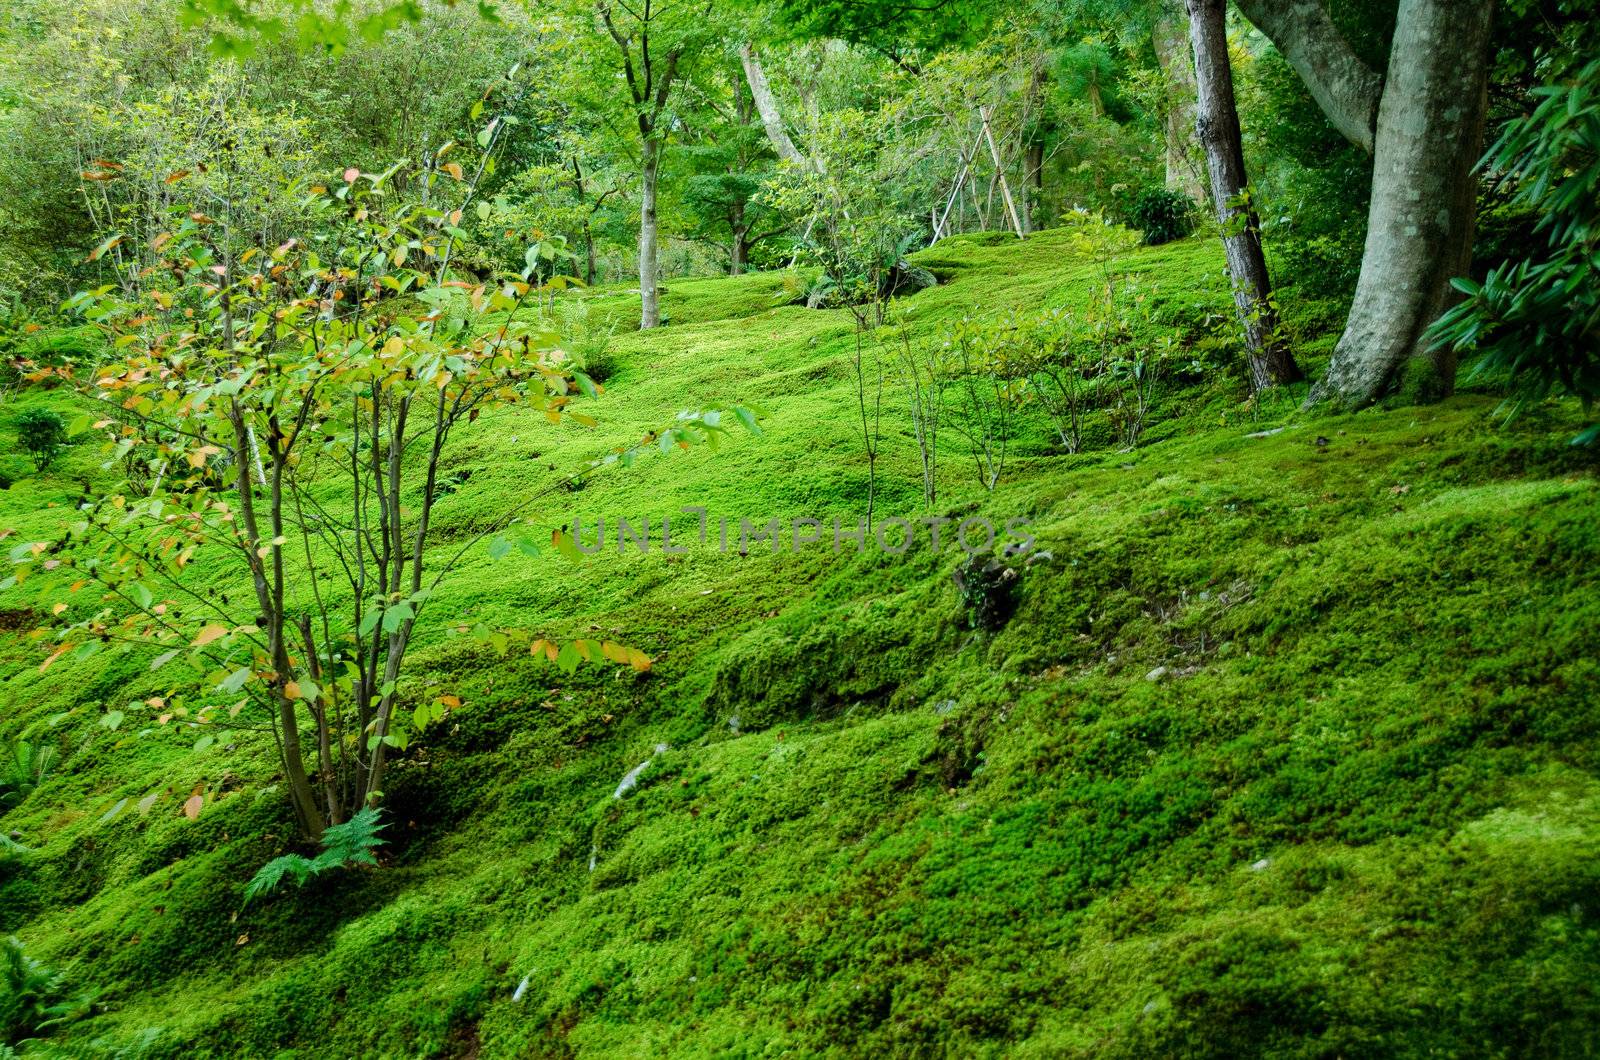 Moss on forest floor by Arrxxx